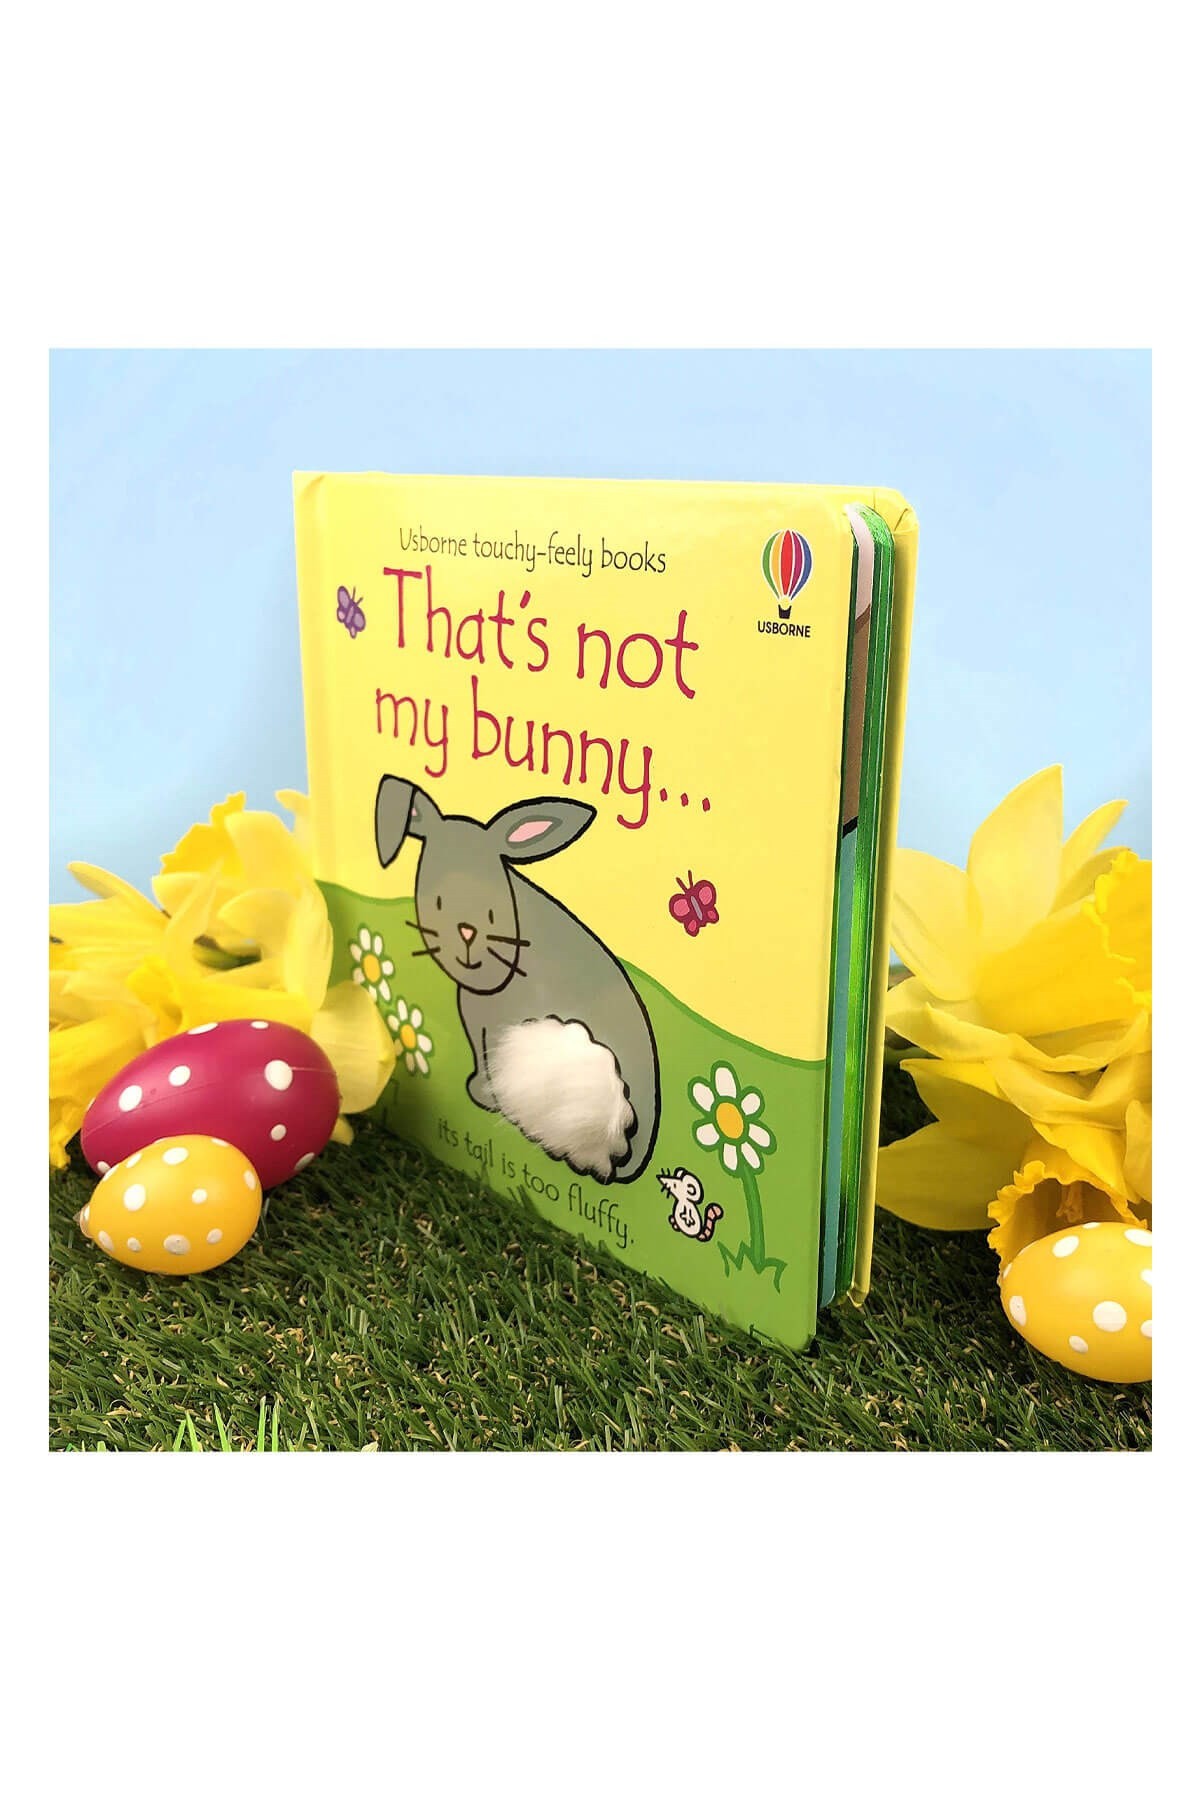 The Usborne That's Not My Bunny Its Tail Is Too Fluffy